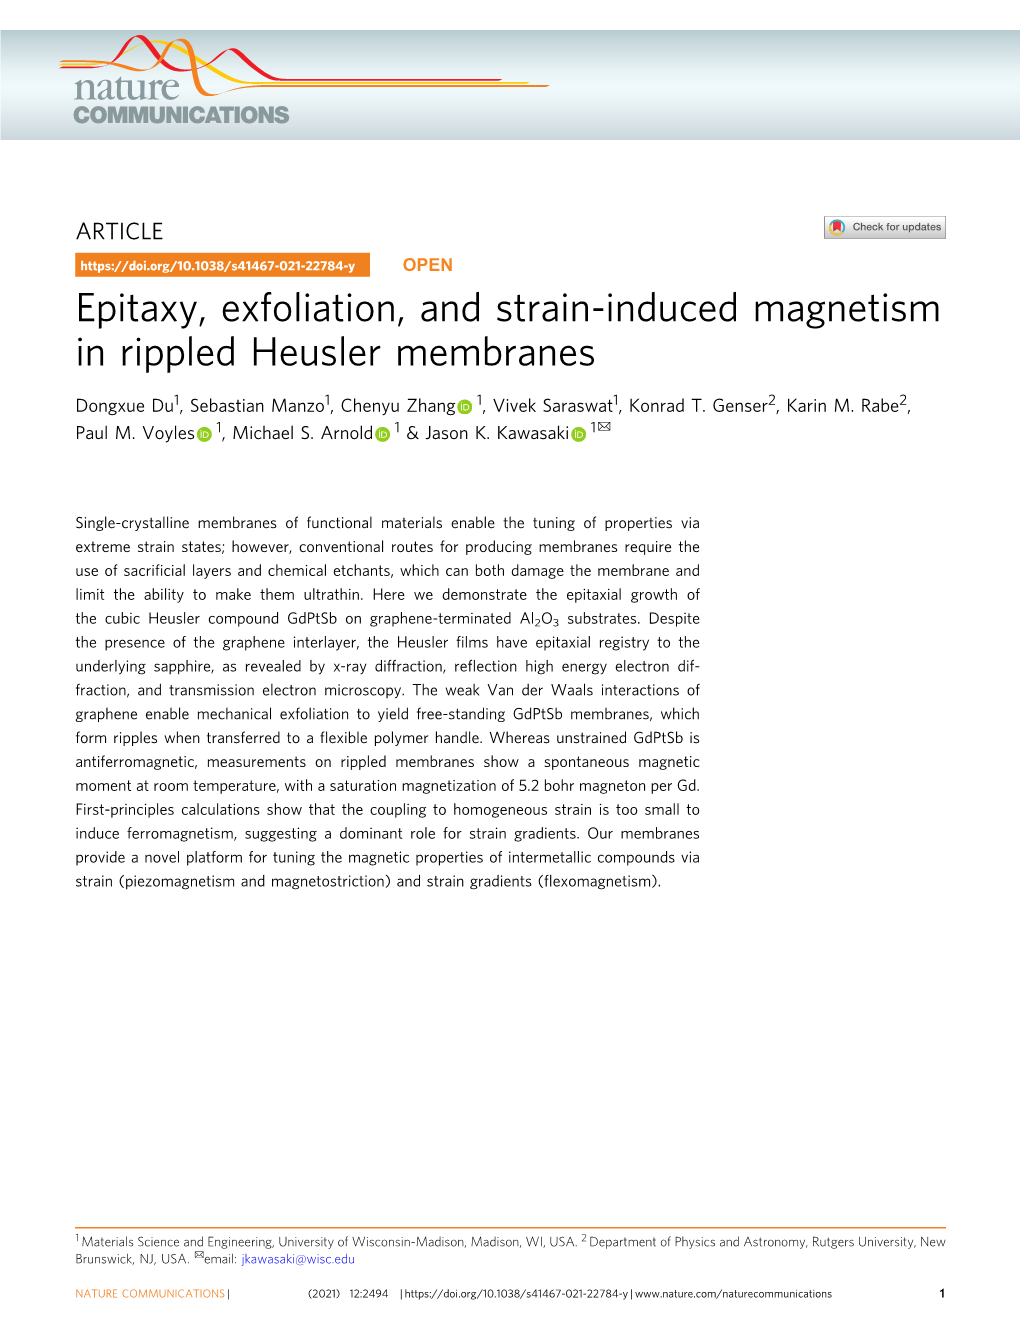 Epitaxy, Exfoliation, and Strain-Induced Magnetism in Rippled Heusler Membranes